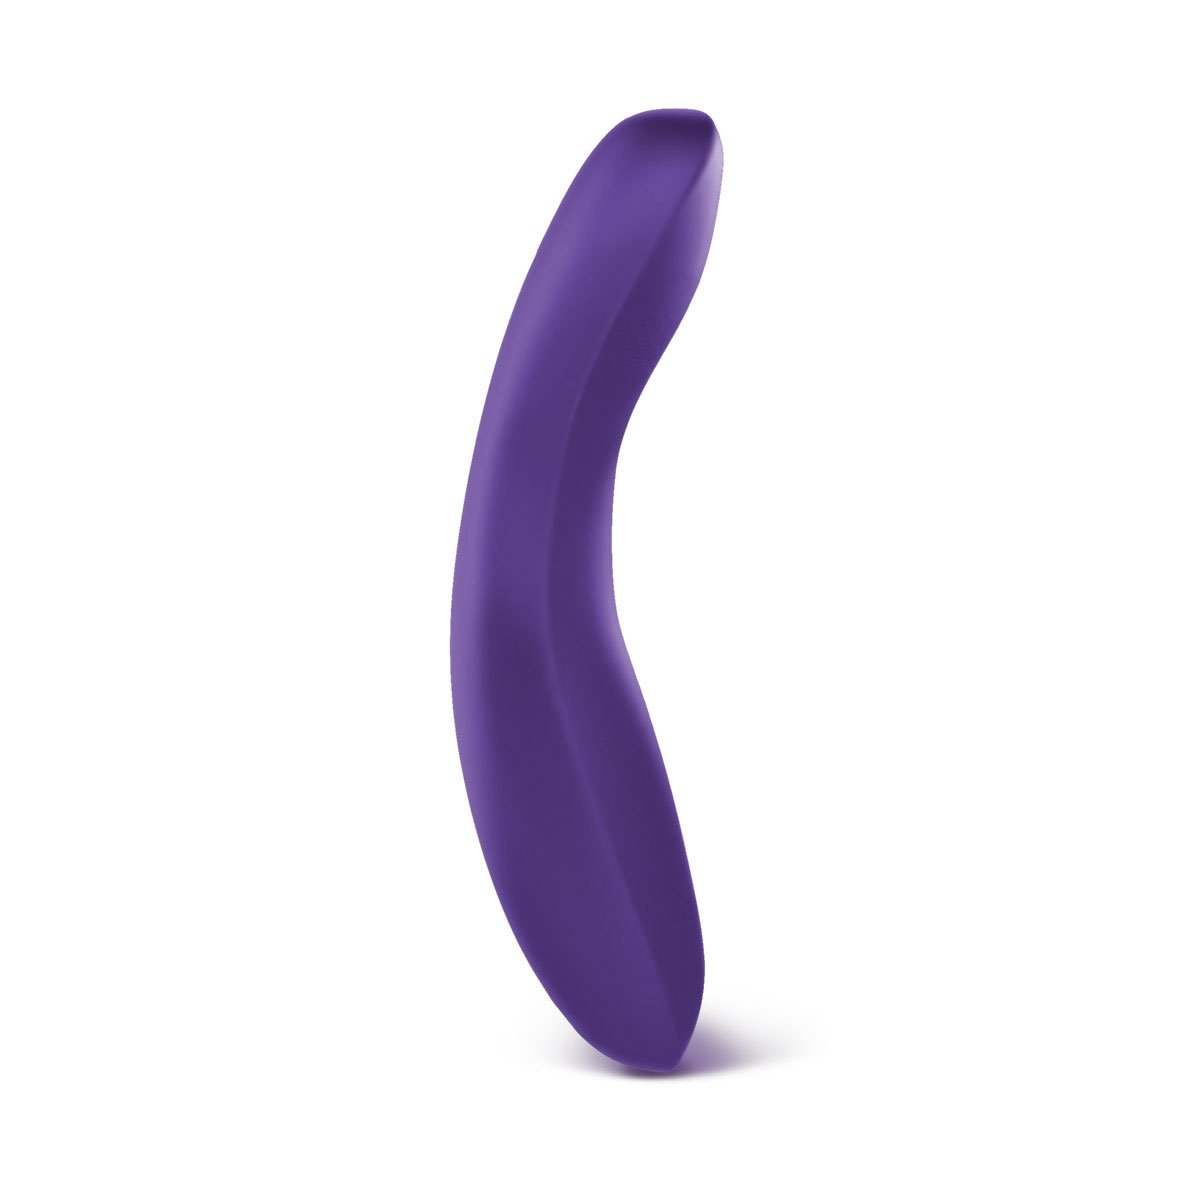 We-Vibe Rave G-Spot - Buy At Luxury Toy X - Free 3-Day Shipping